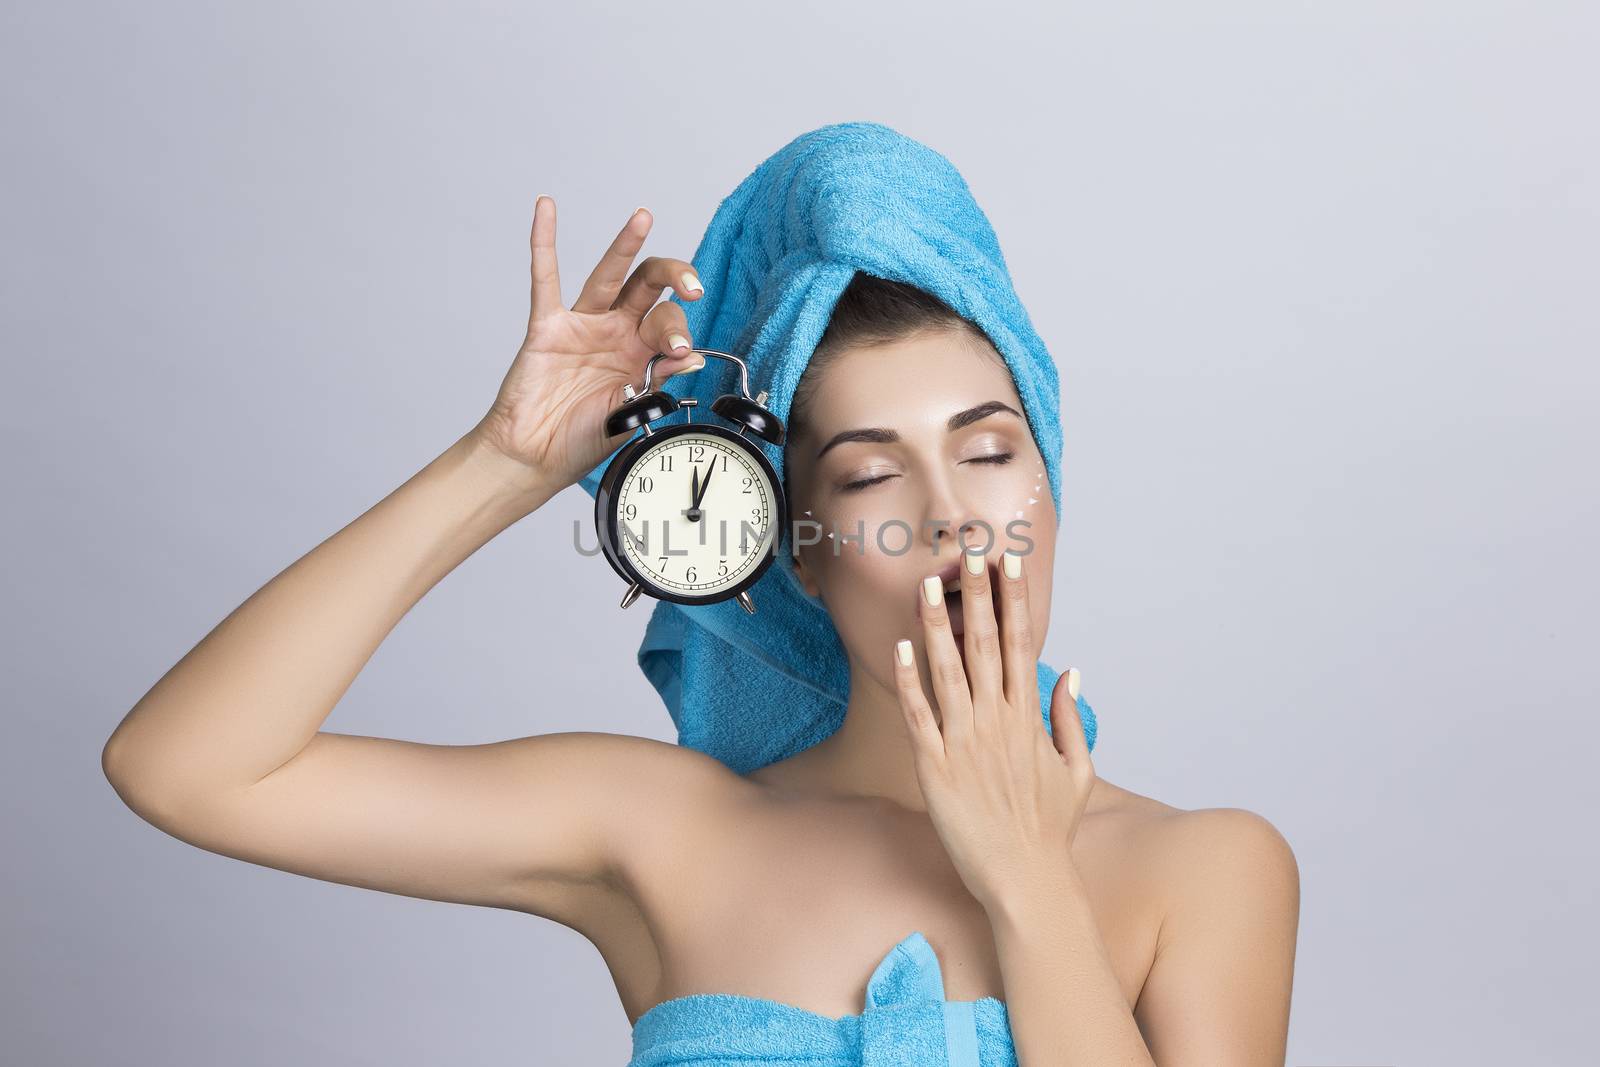 Tired yawning woman in towel on head and creme on face holding alarm clock showing midnight, night creme skincare concept